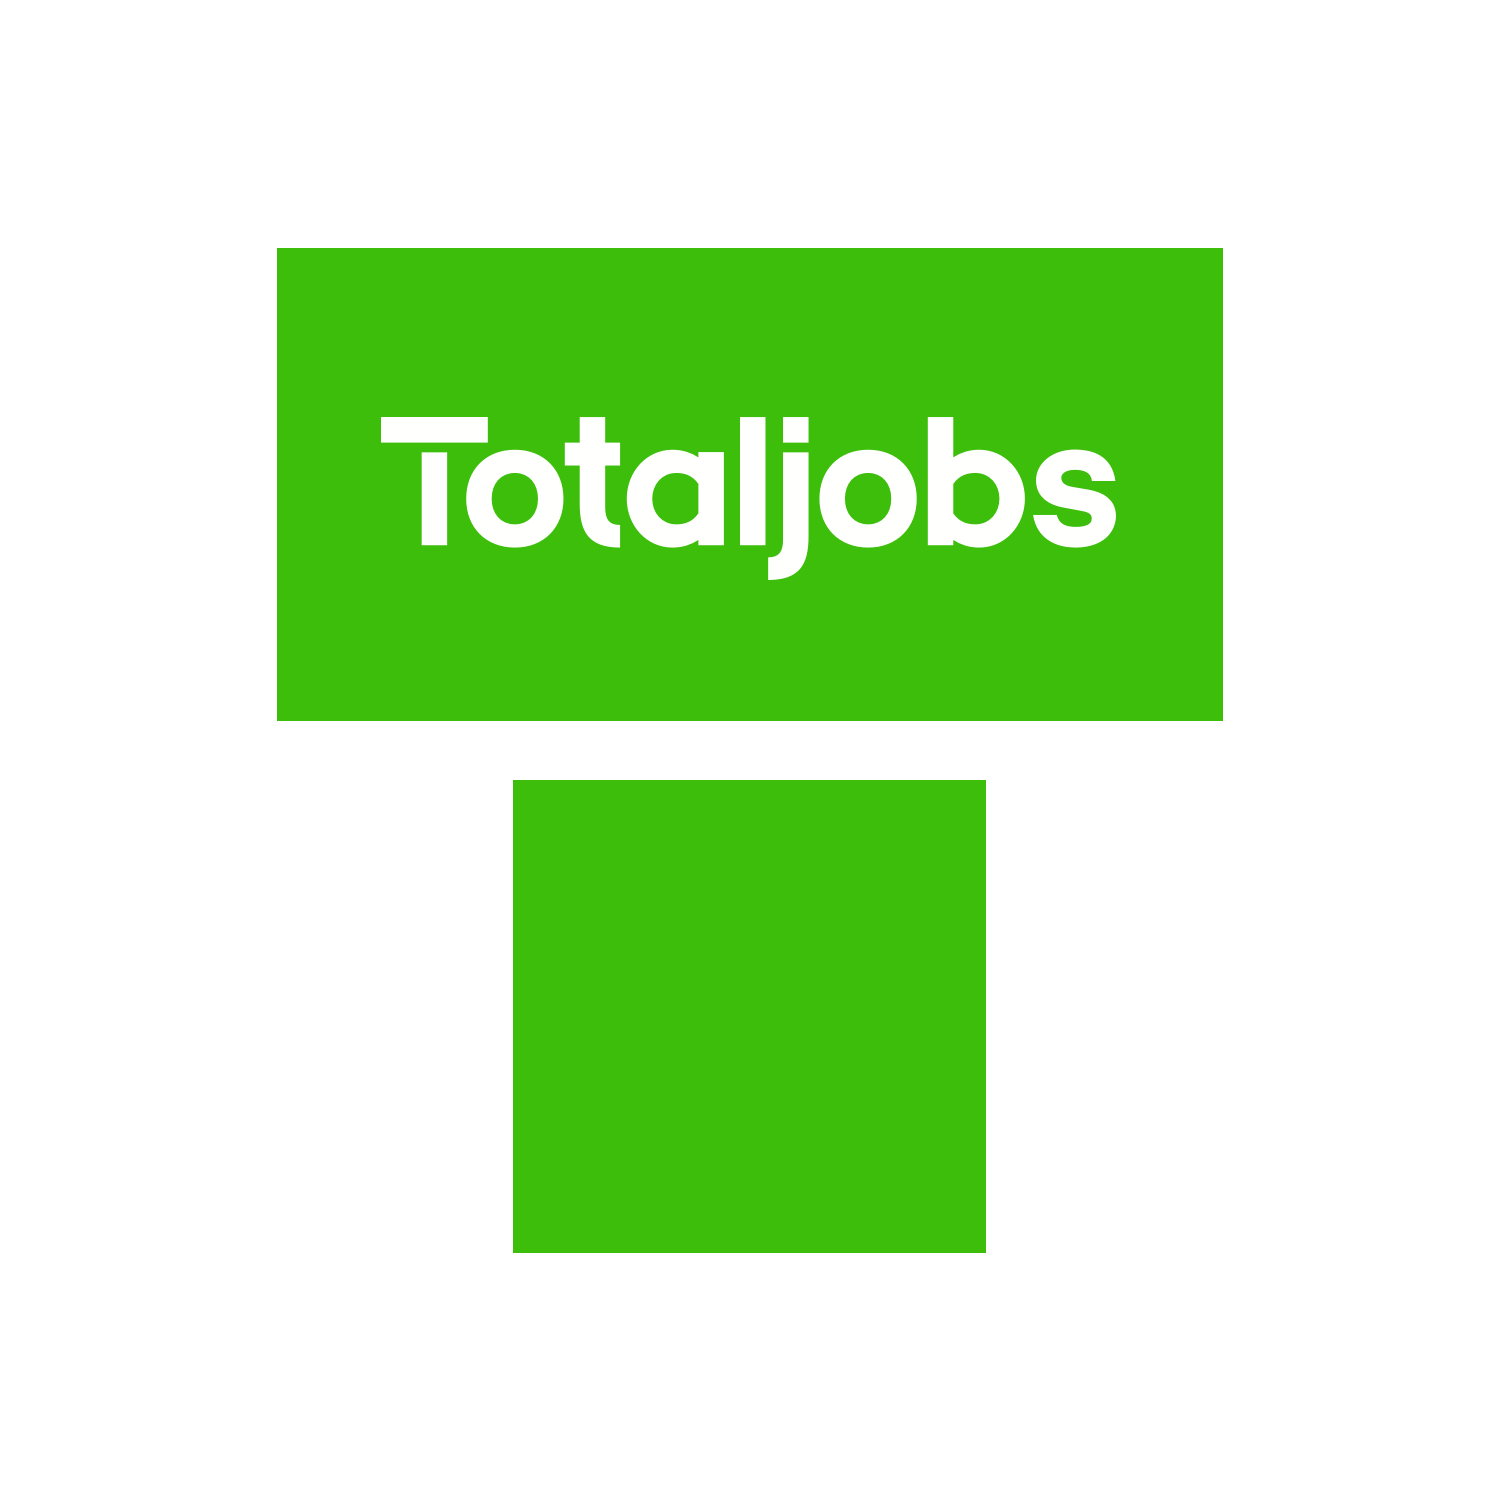 Hair Stylist Jobs In April 2020 Careers Recruitment Totaljobs